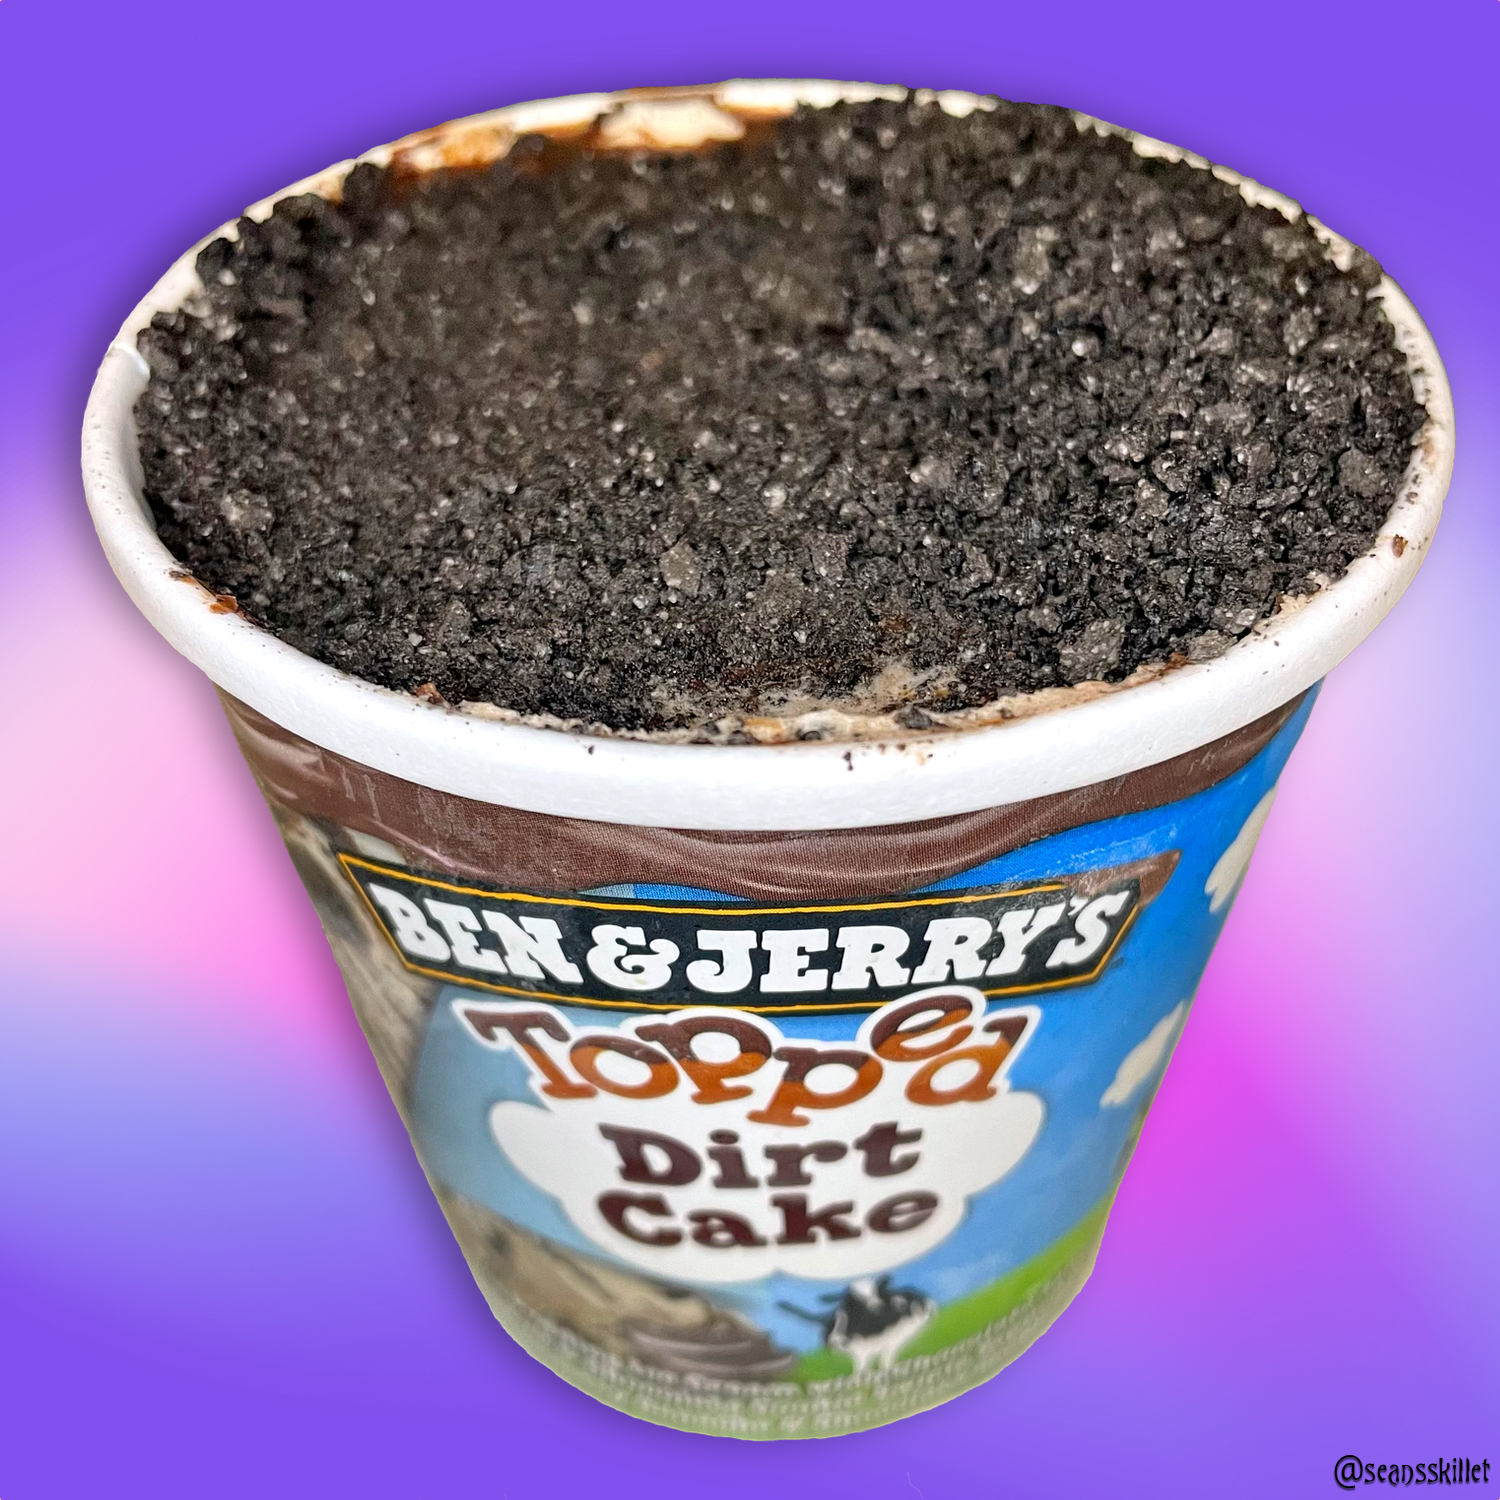 REVIEW: Jerry's Topped Dirt Cake | Skillet